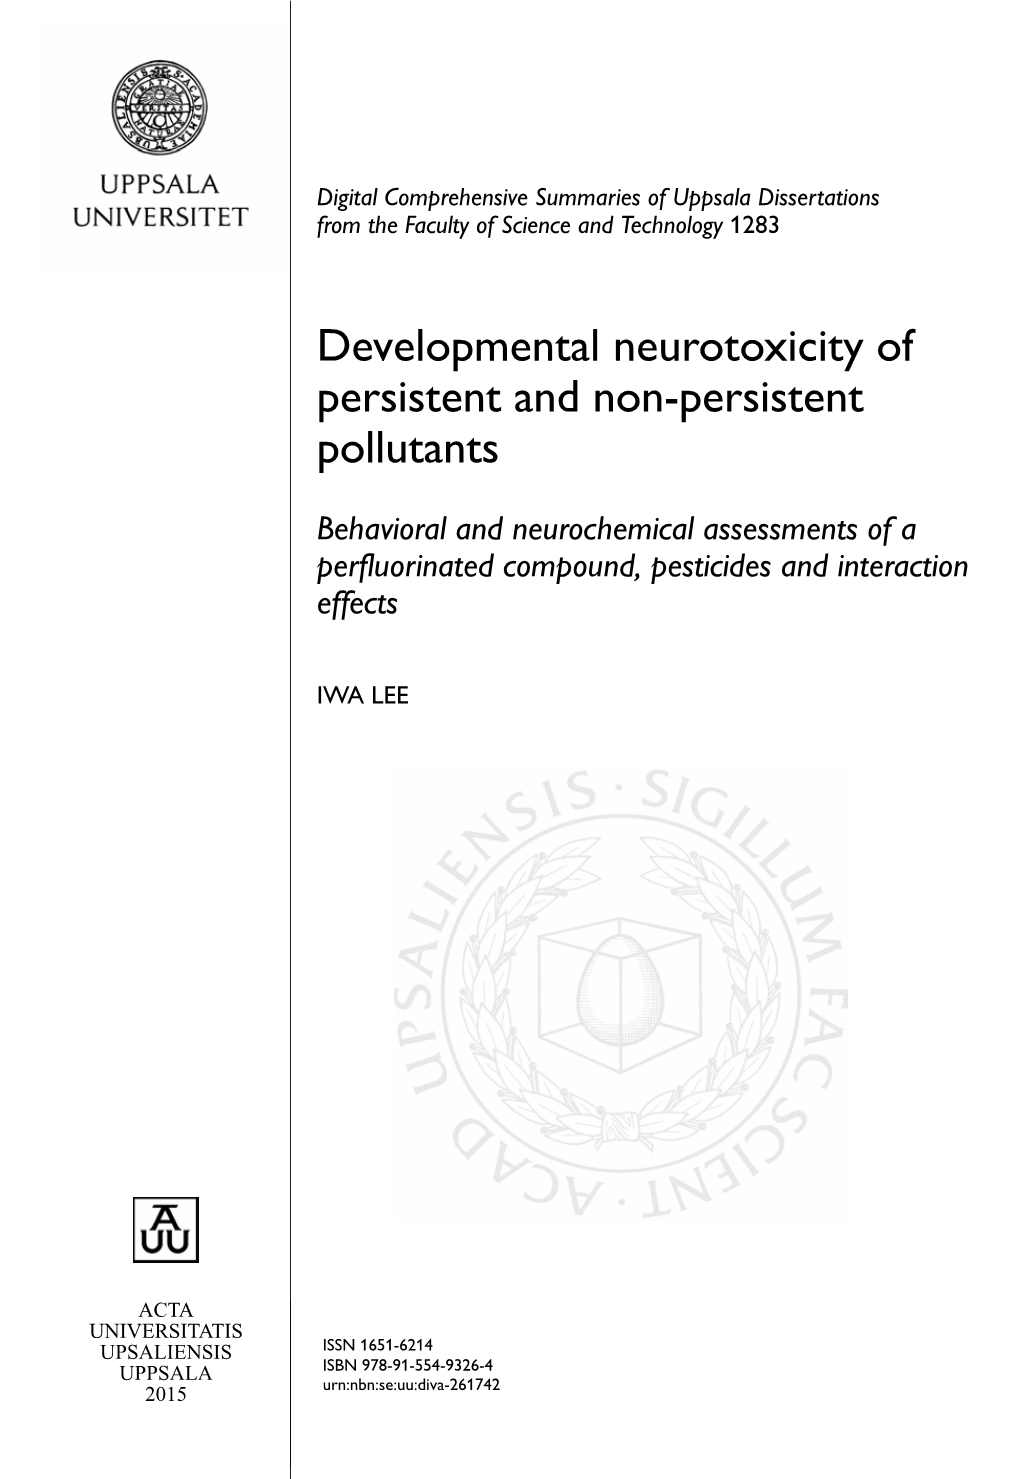 Developmental Neurotoxicity of Persistent and Non-Persistent Pollutants